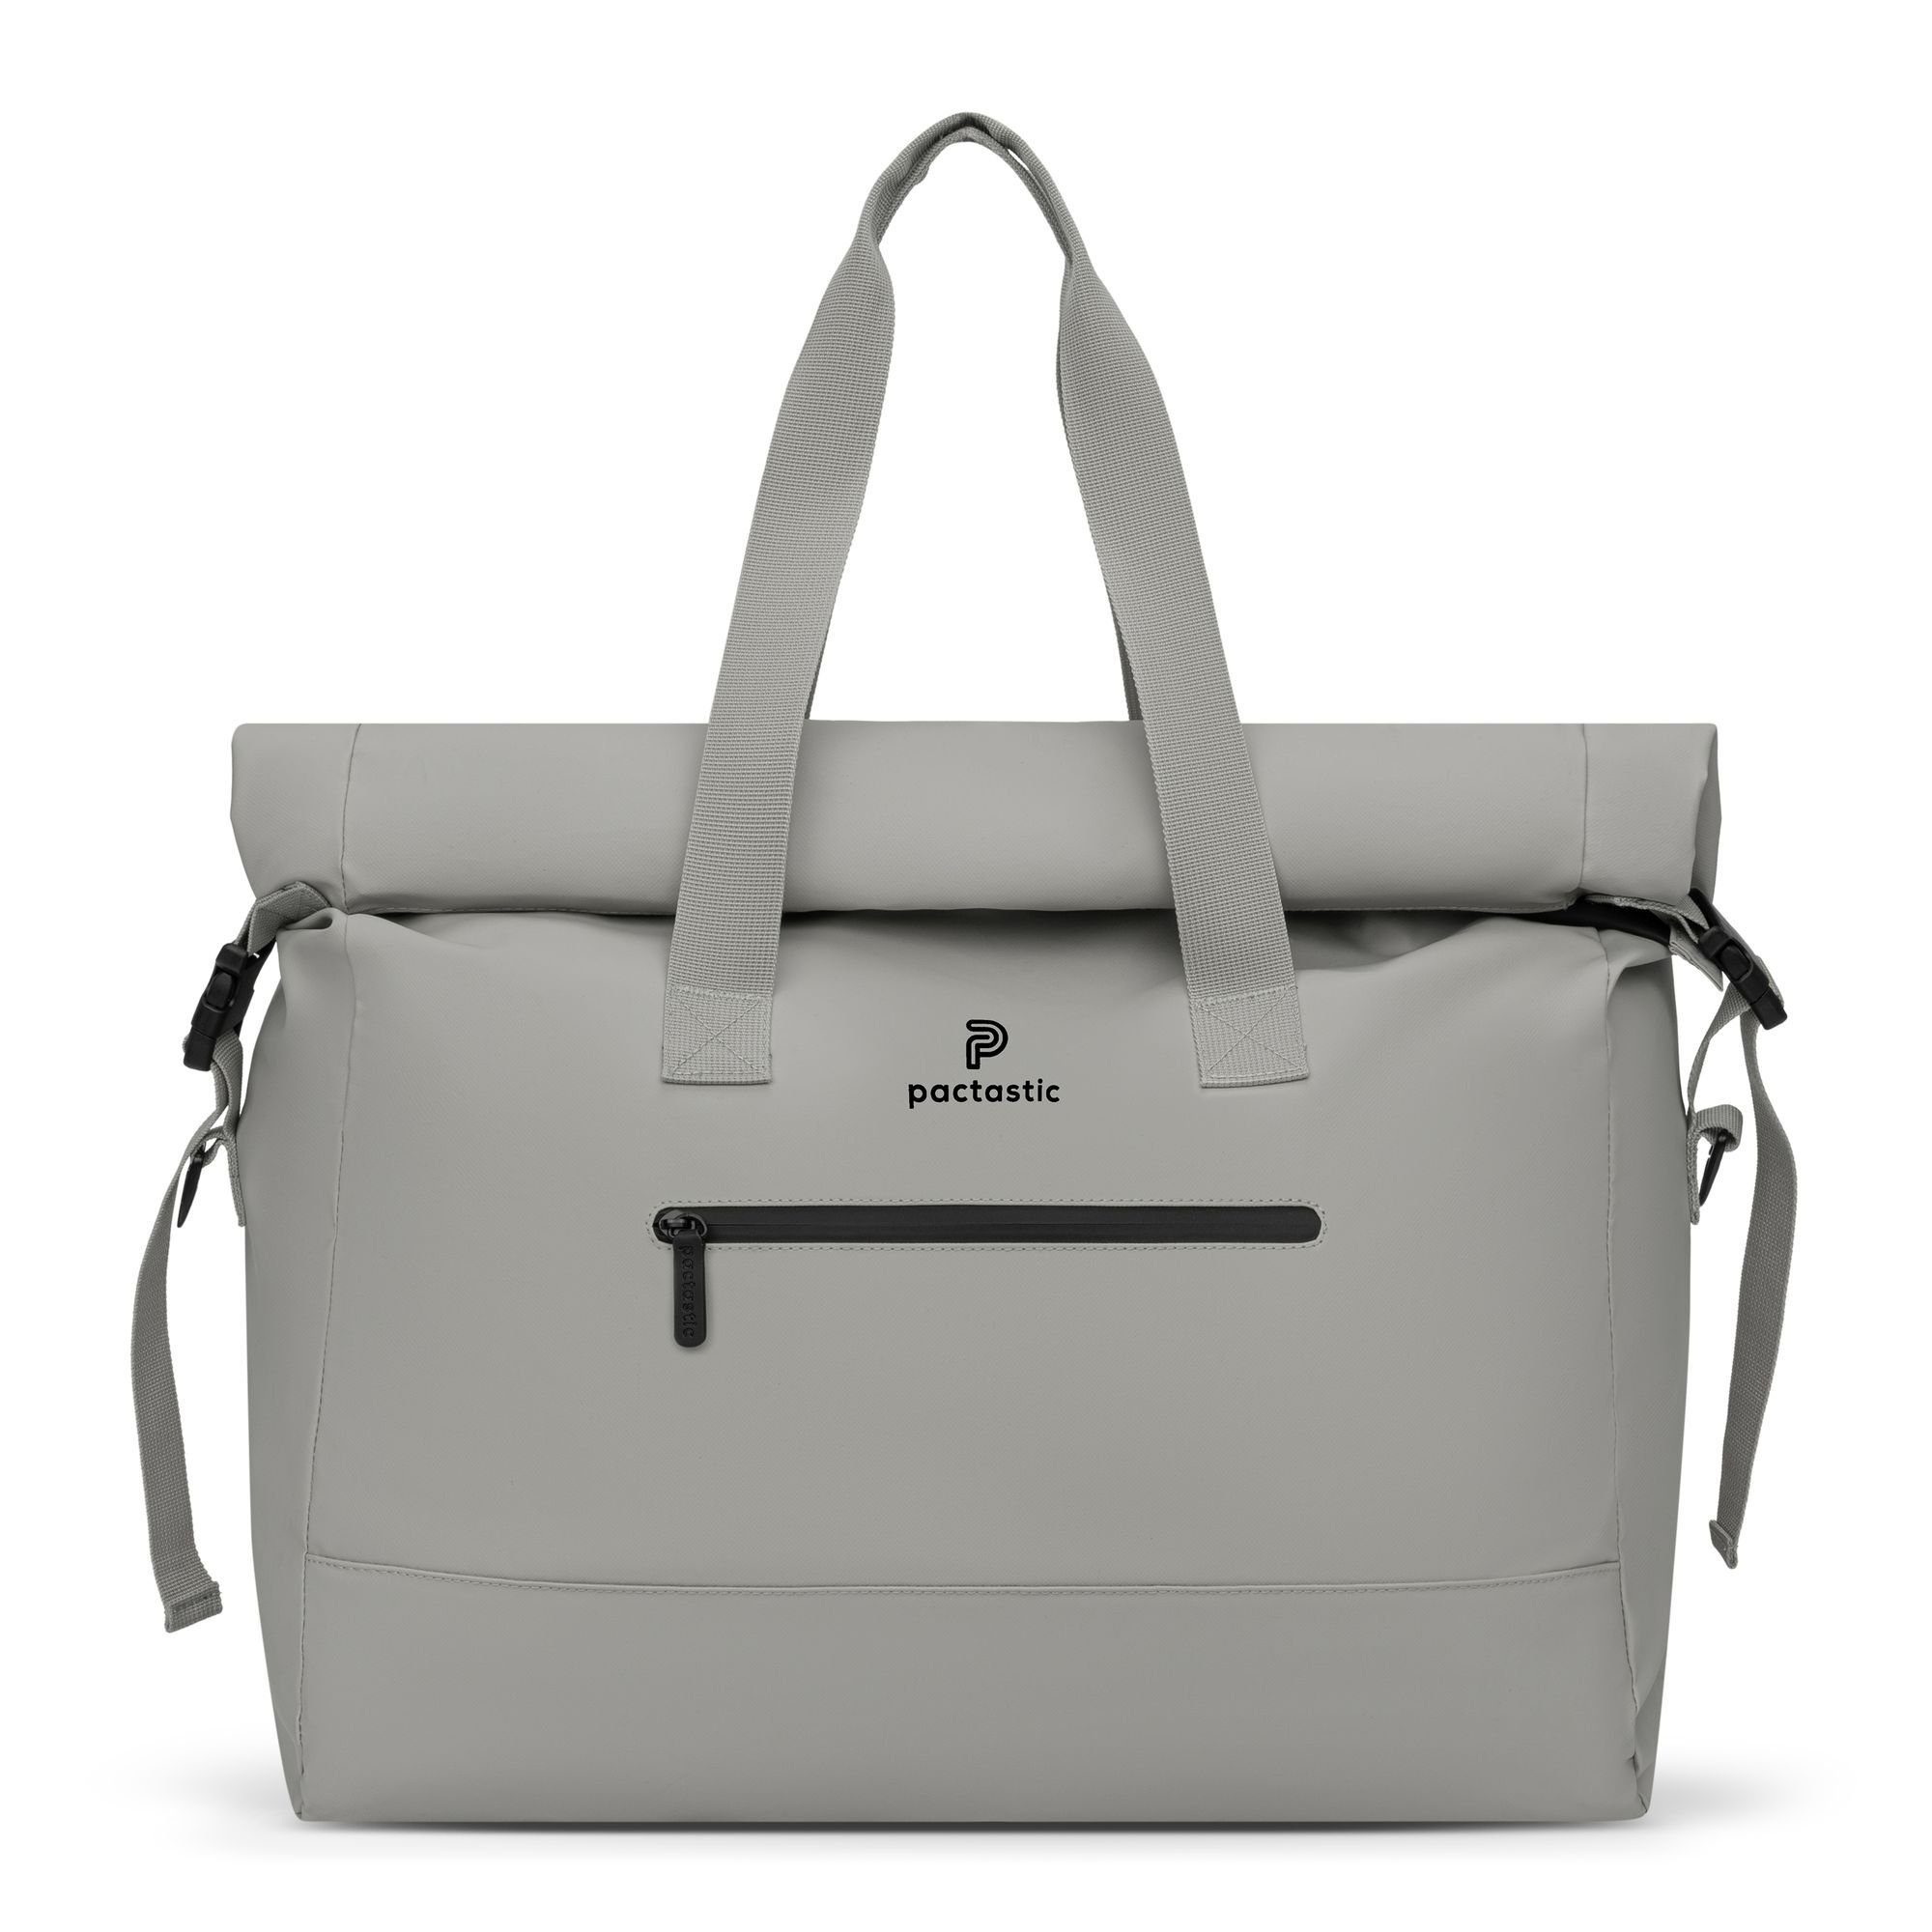 Pactastic Weekender Collection, Veganes Tech-Material grey Urban